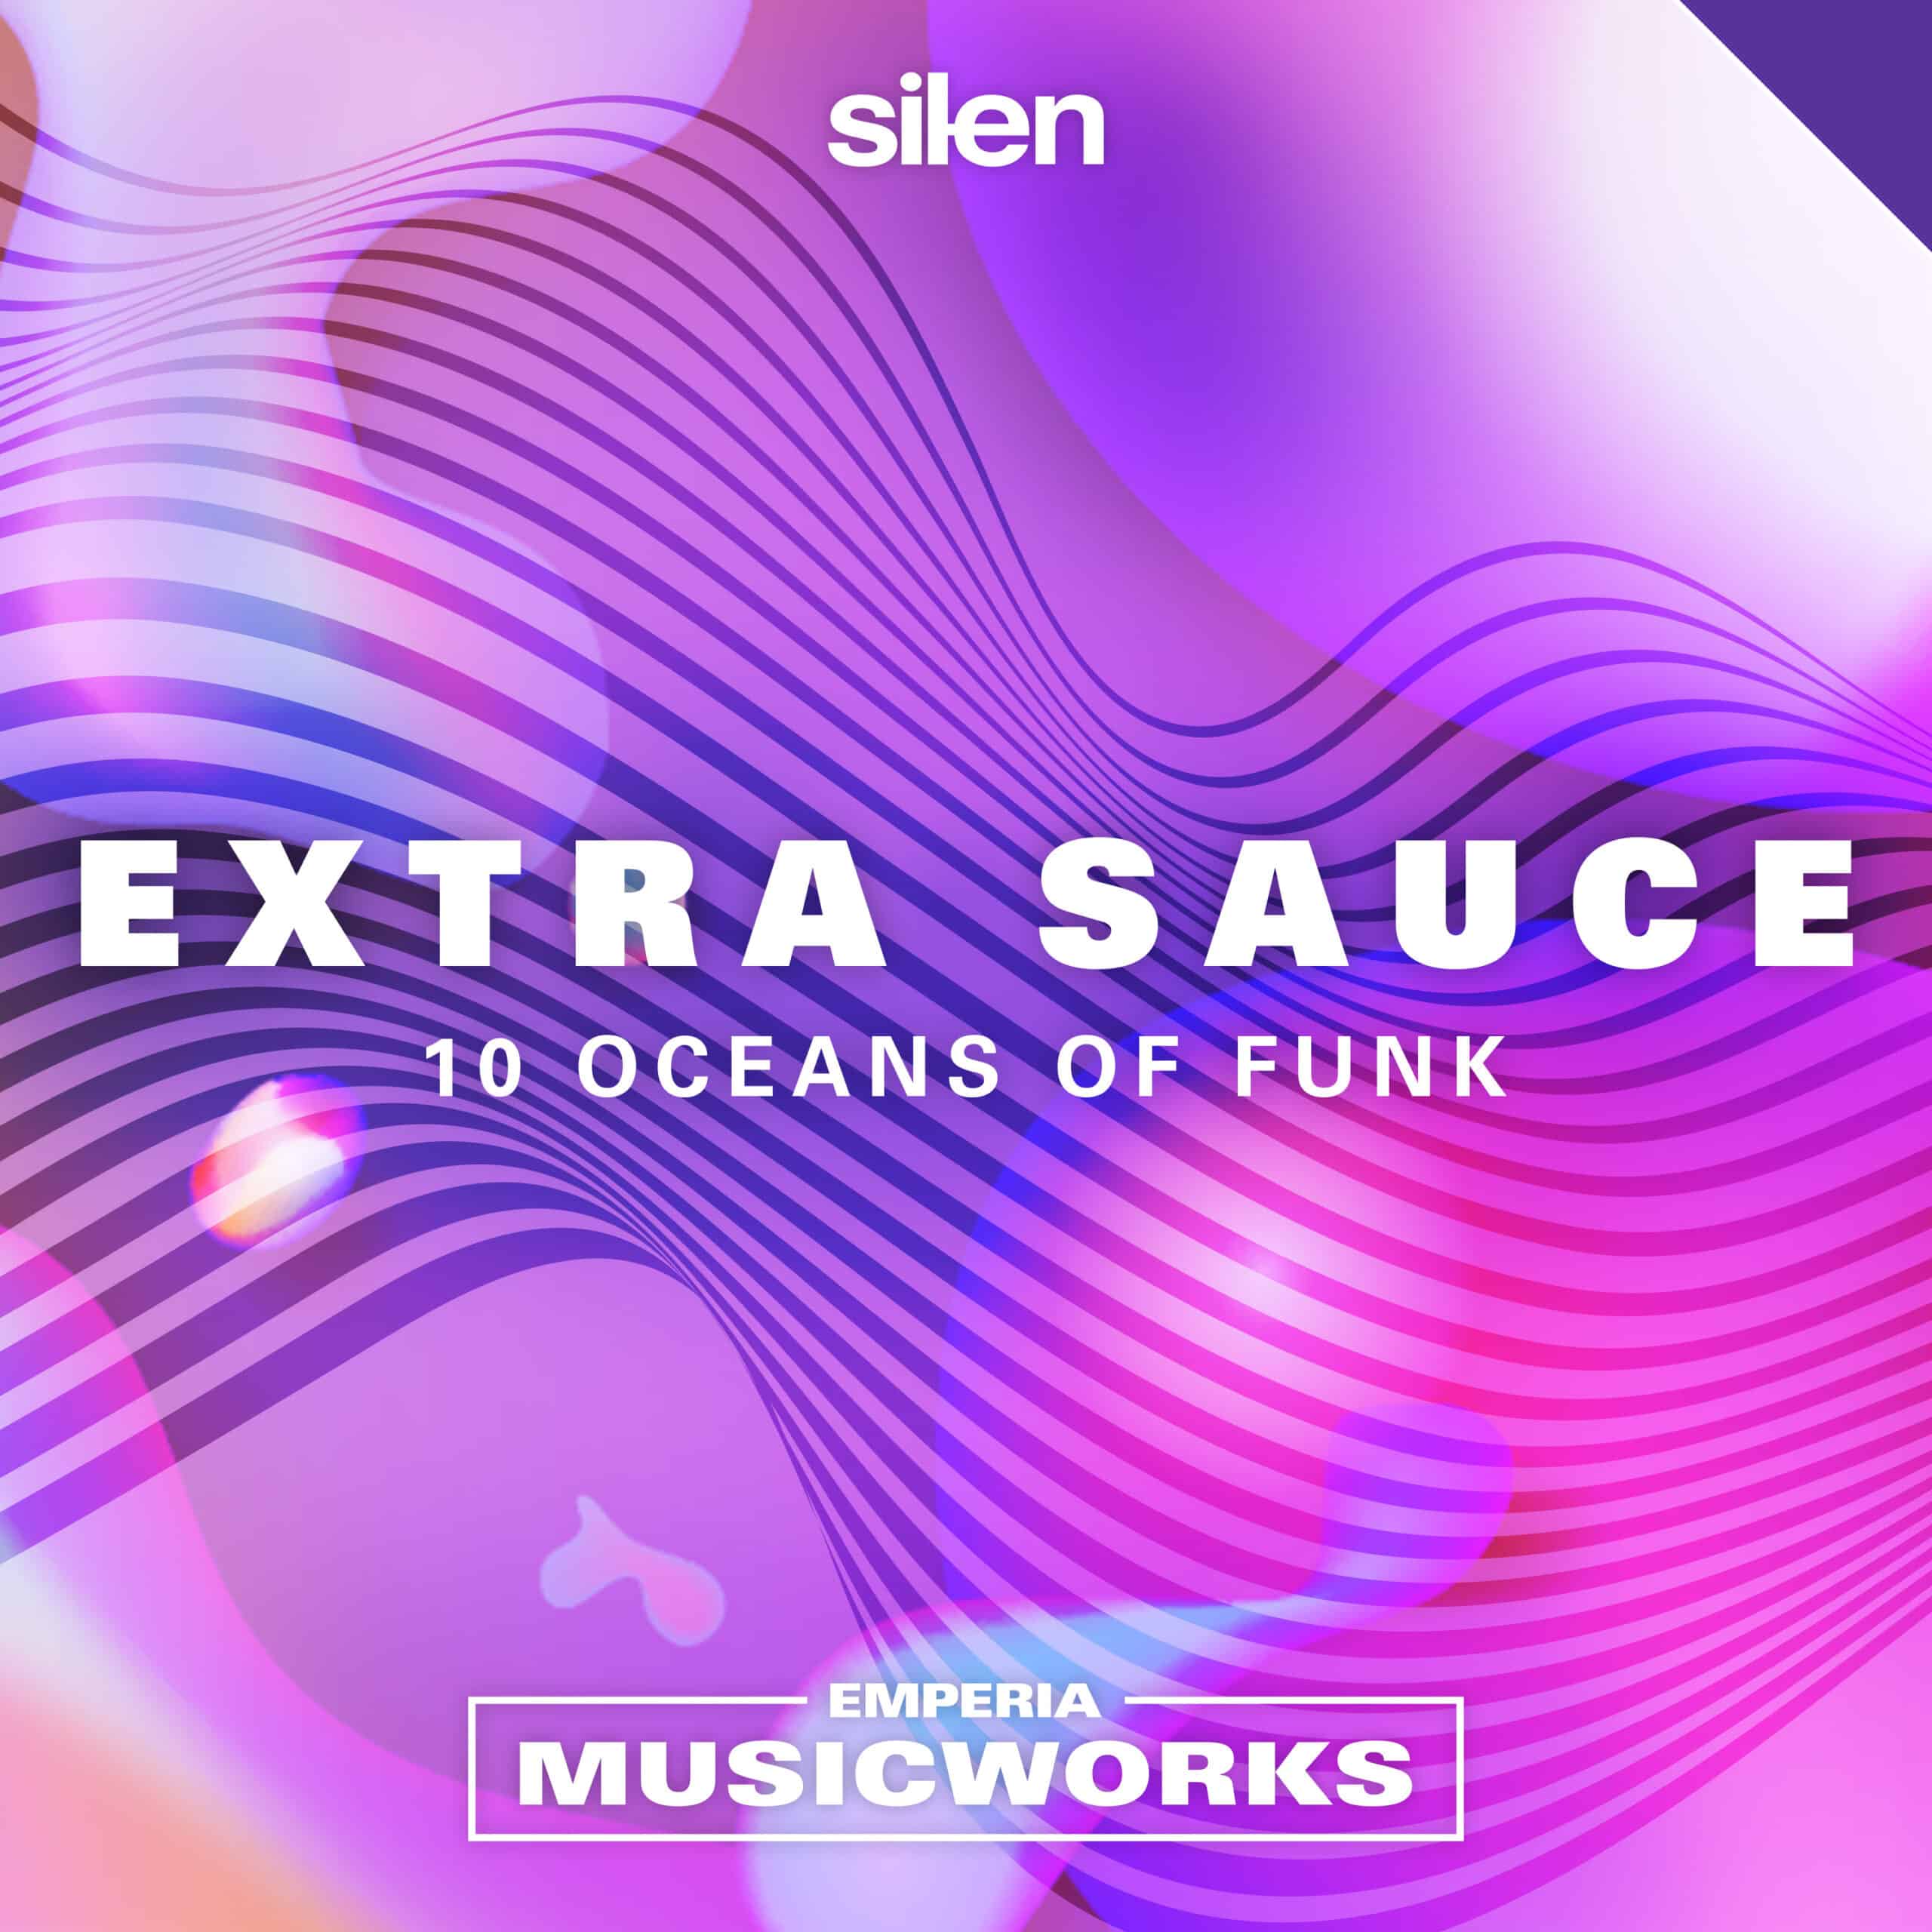 Extra Sauce: 10 Oceans Of Funk Funky music to make you move. Live bass and drums groove with fun, interwoven percussion and with a uniquely upbeat and pop palate.